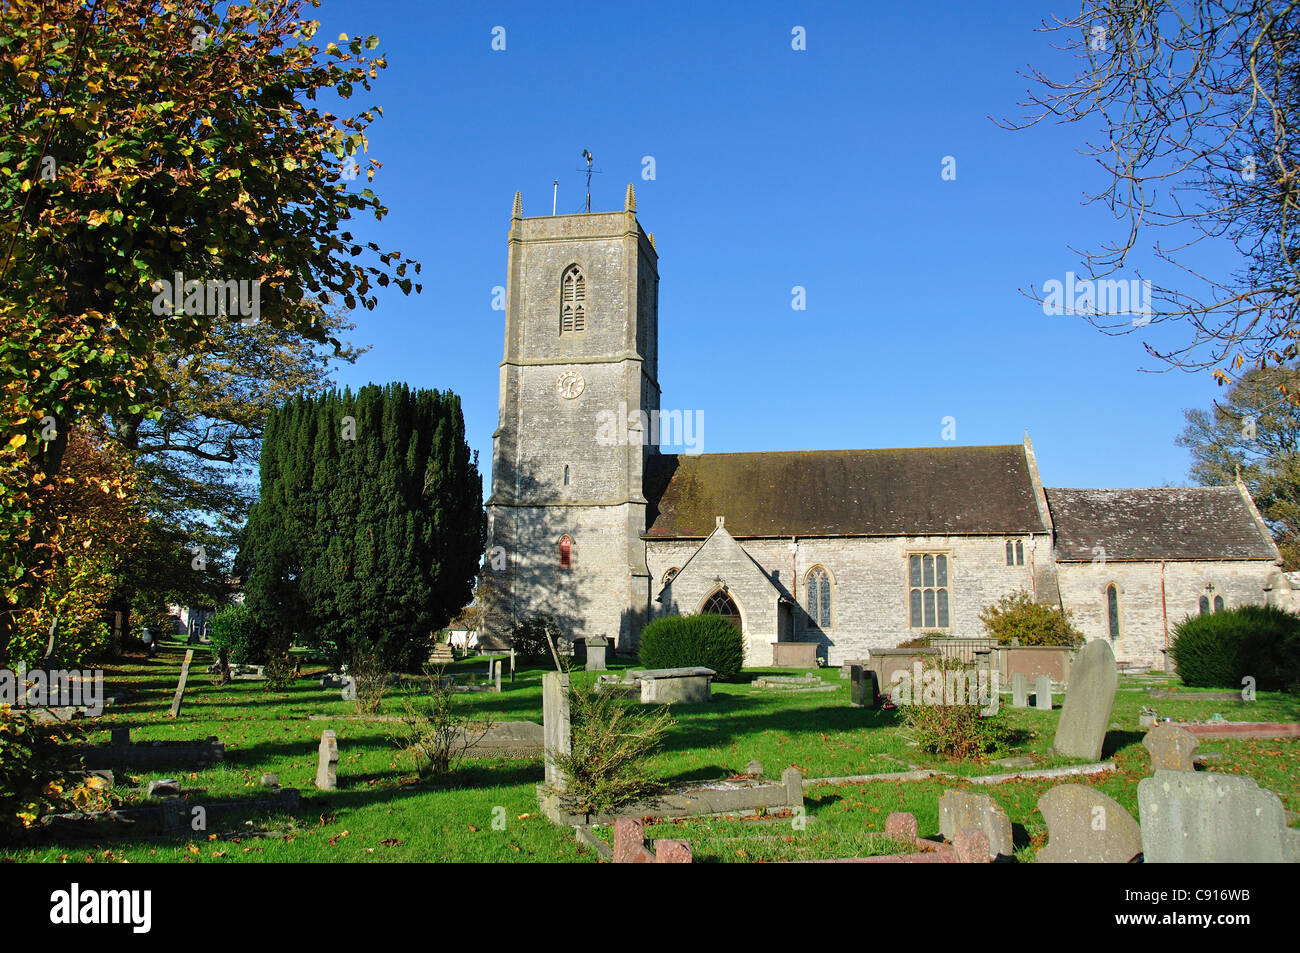 The Parish Church of St Thomas a Becket, Pucklechurch, Gloucestershire, England, United Kingdom. Stock Photo